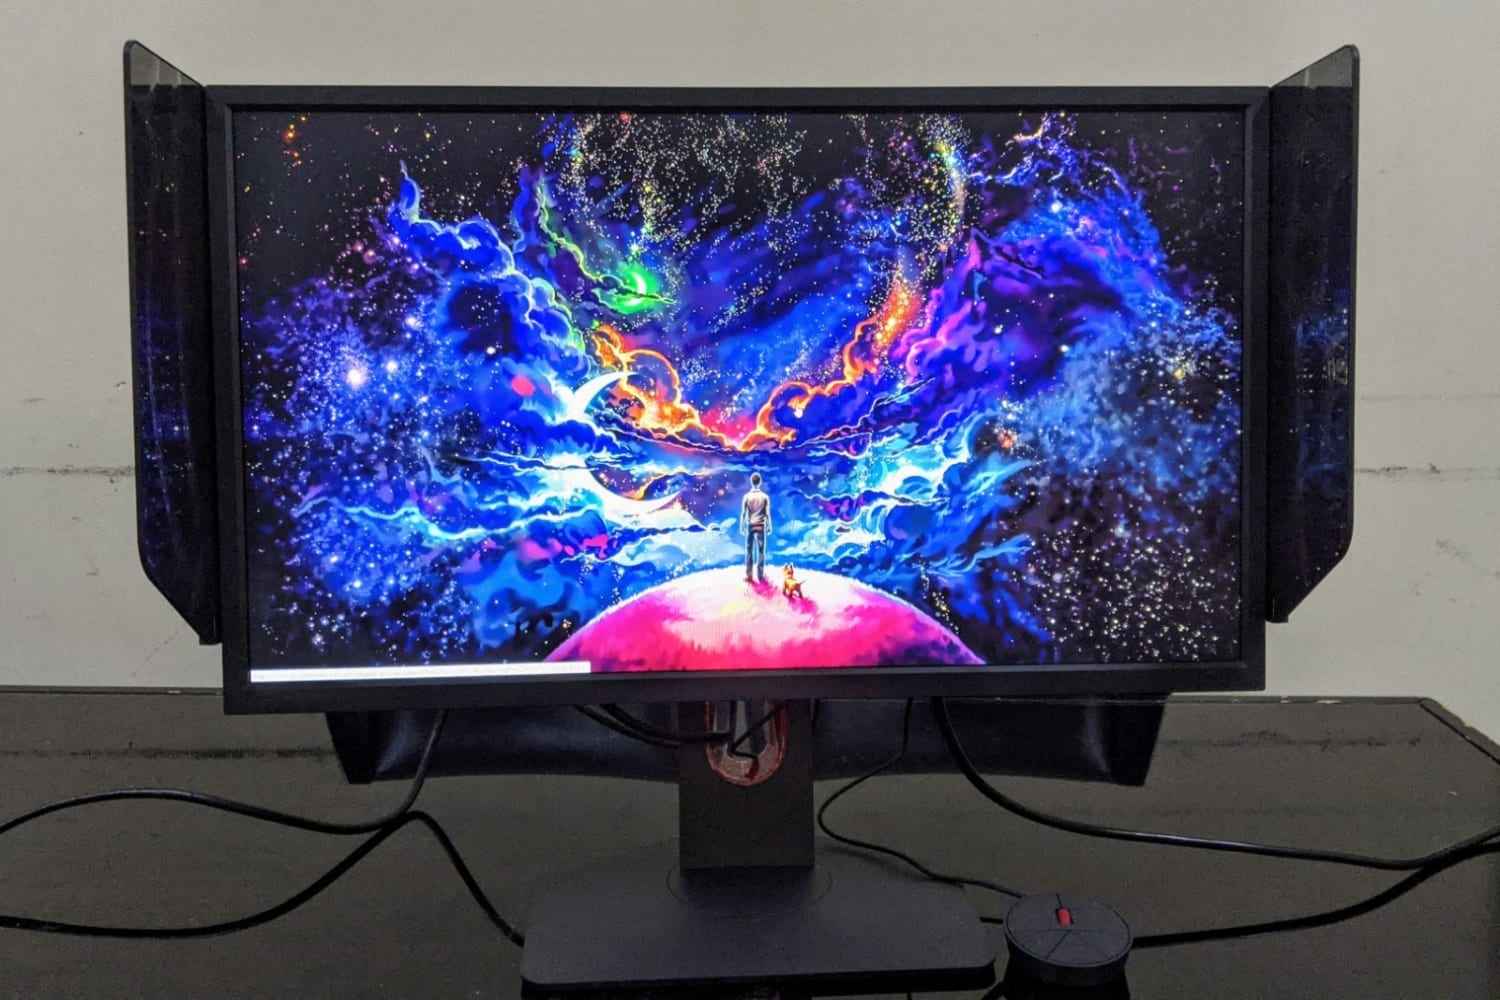 BenQ Zowie XL2546K E-Sports Monitor Review - Latest Tech News, Reviews, Tips And Tutorials